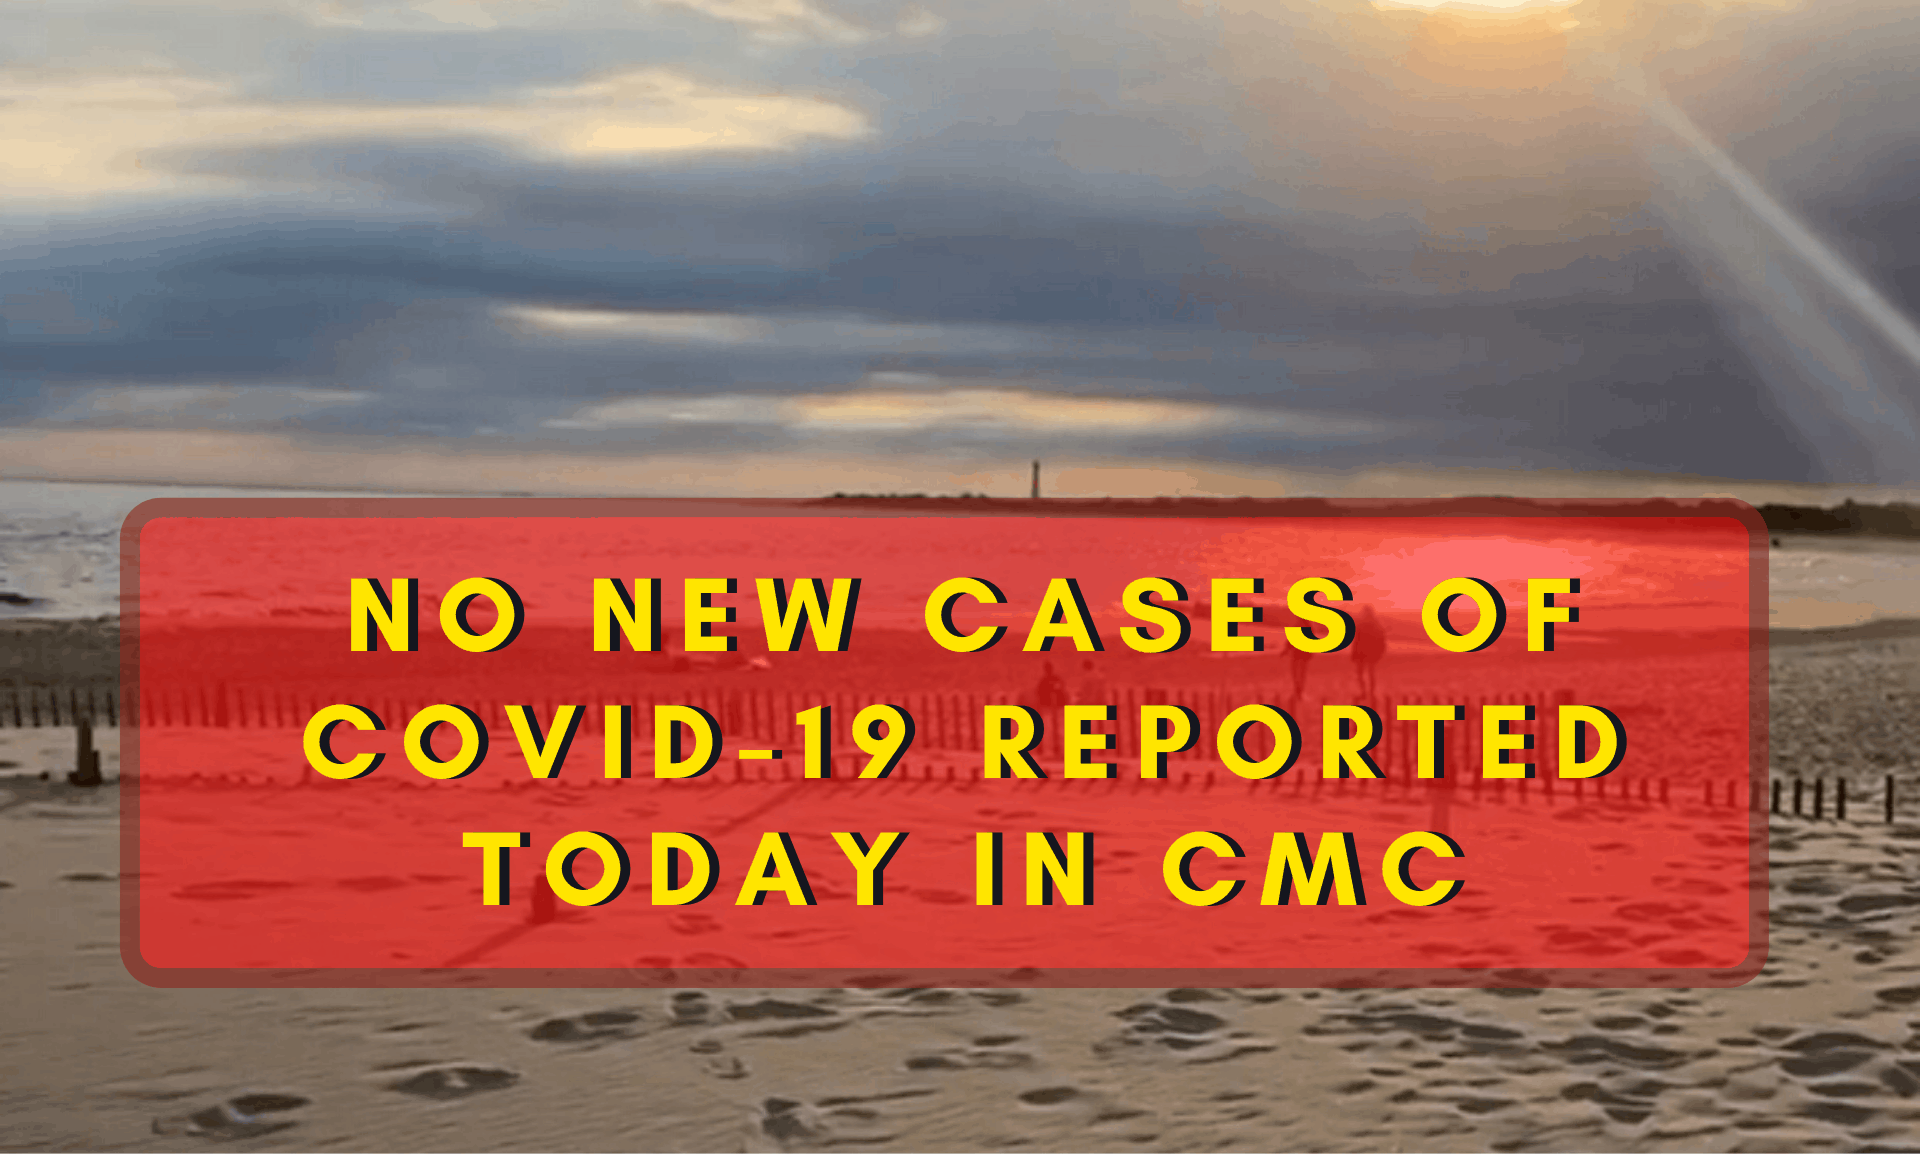 NO NEW CASES OF COVID-19 REPORTED TODAY IN CMC